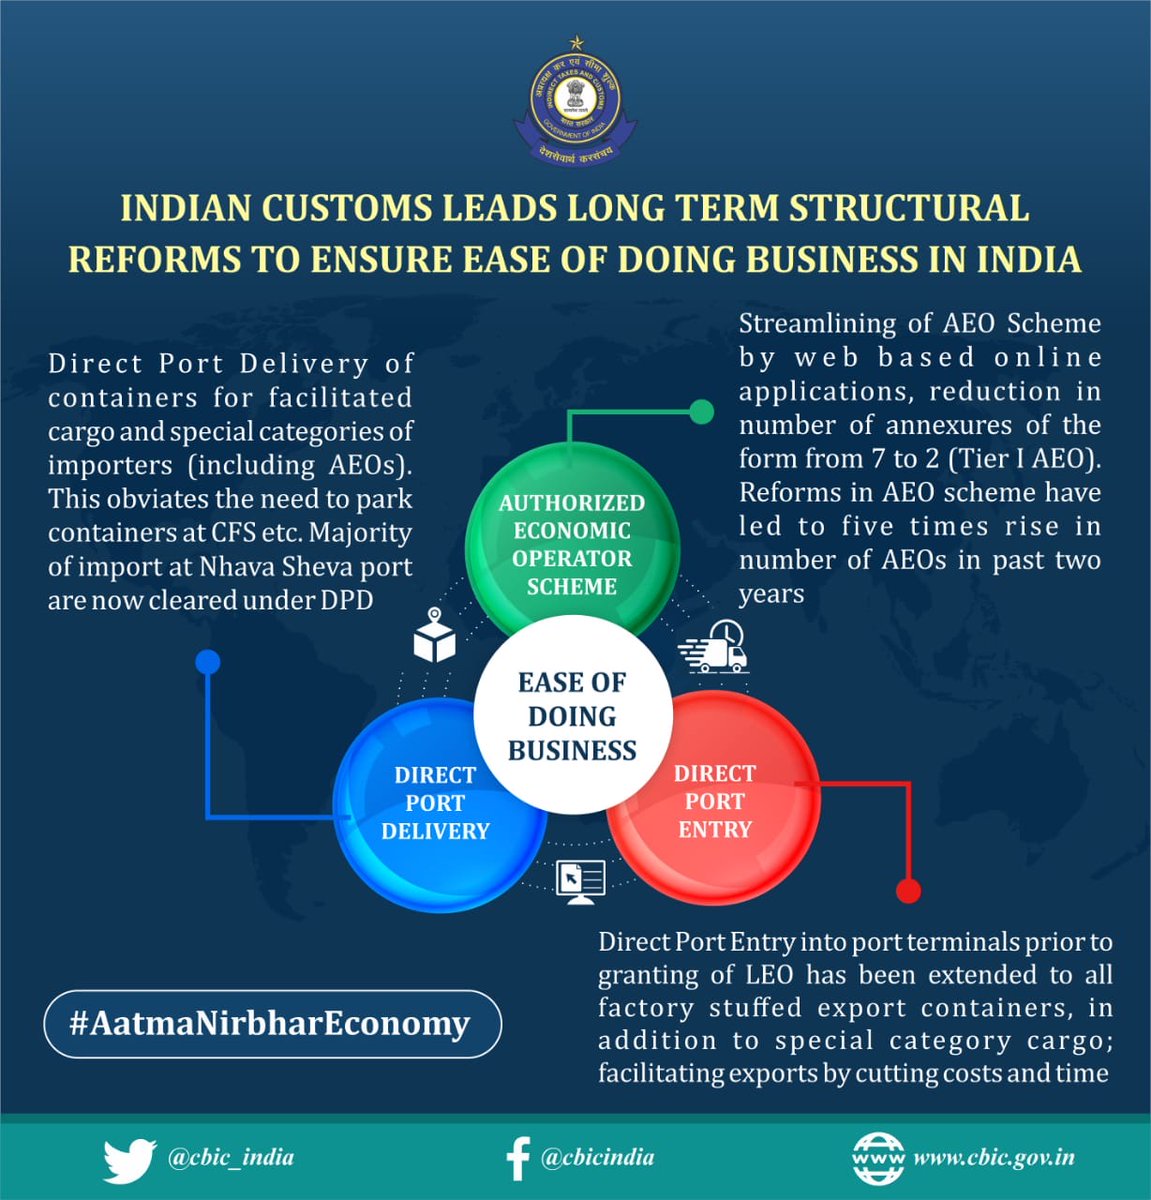 Indian Customs leads long term structural reforms to ensure Ease of Doing Business. #EODB #AatmaNirbharEconomy